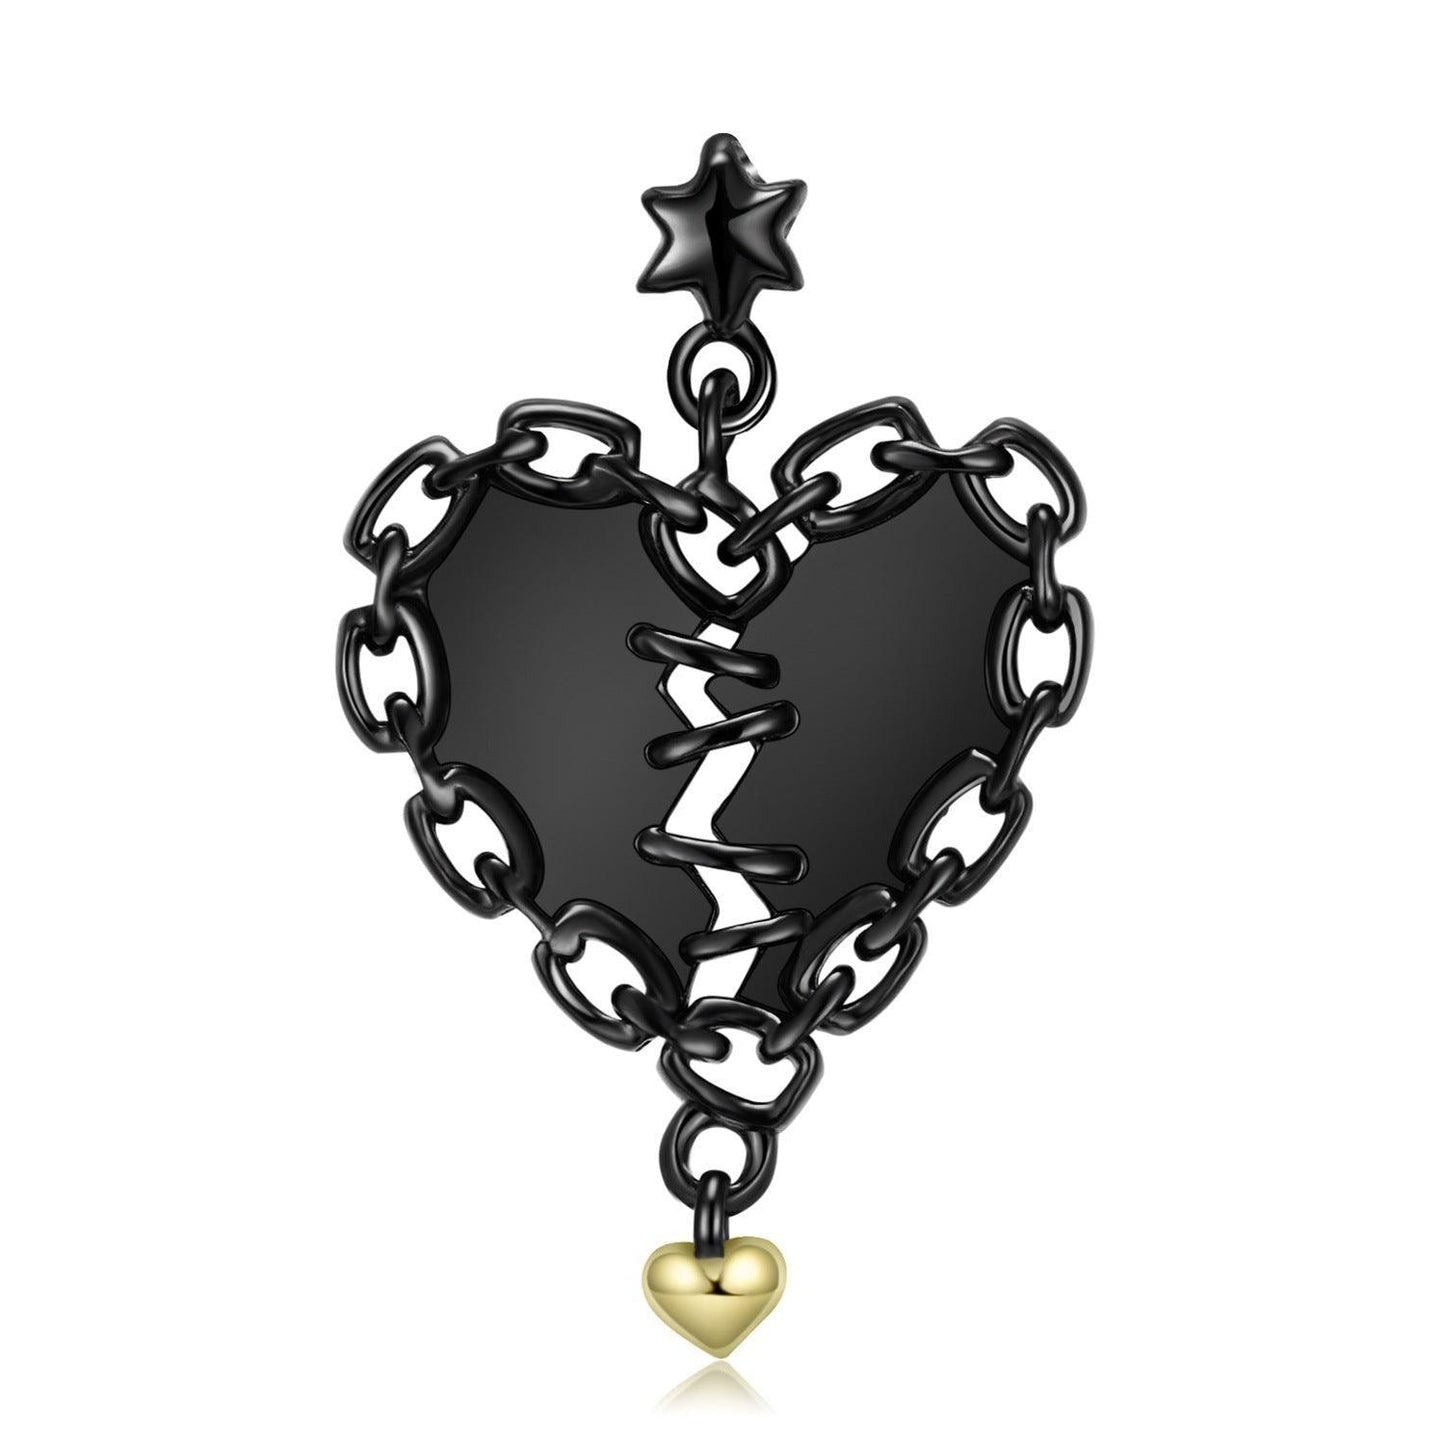 Sewn Heart Cute Black GoldS925 Silver Necklace for Christmas 2023 | Sewn Heart Cute Black GoldS925 Silver Necklace - undefined | Black GoldS925 Silver Necklace, creative necklace, S925 Sterling Silver Necklace, Sewn Heart Necklace | From Hunny Life | hunnylife.com